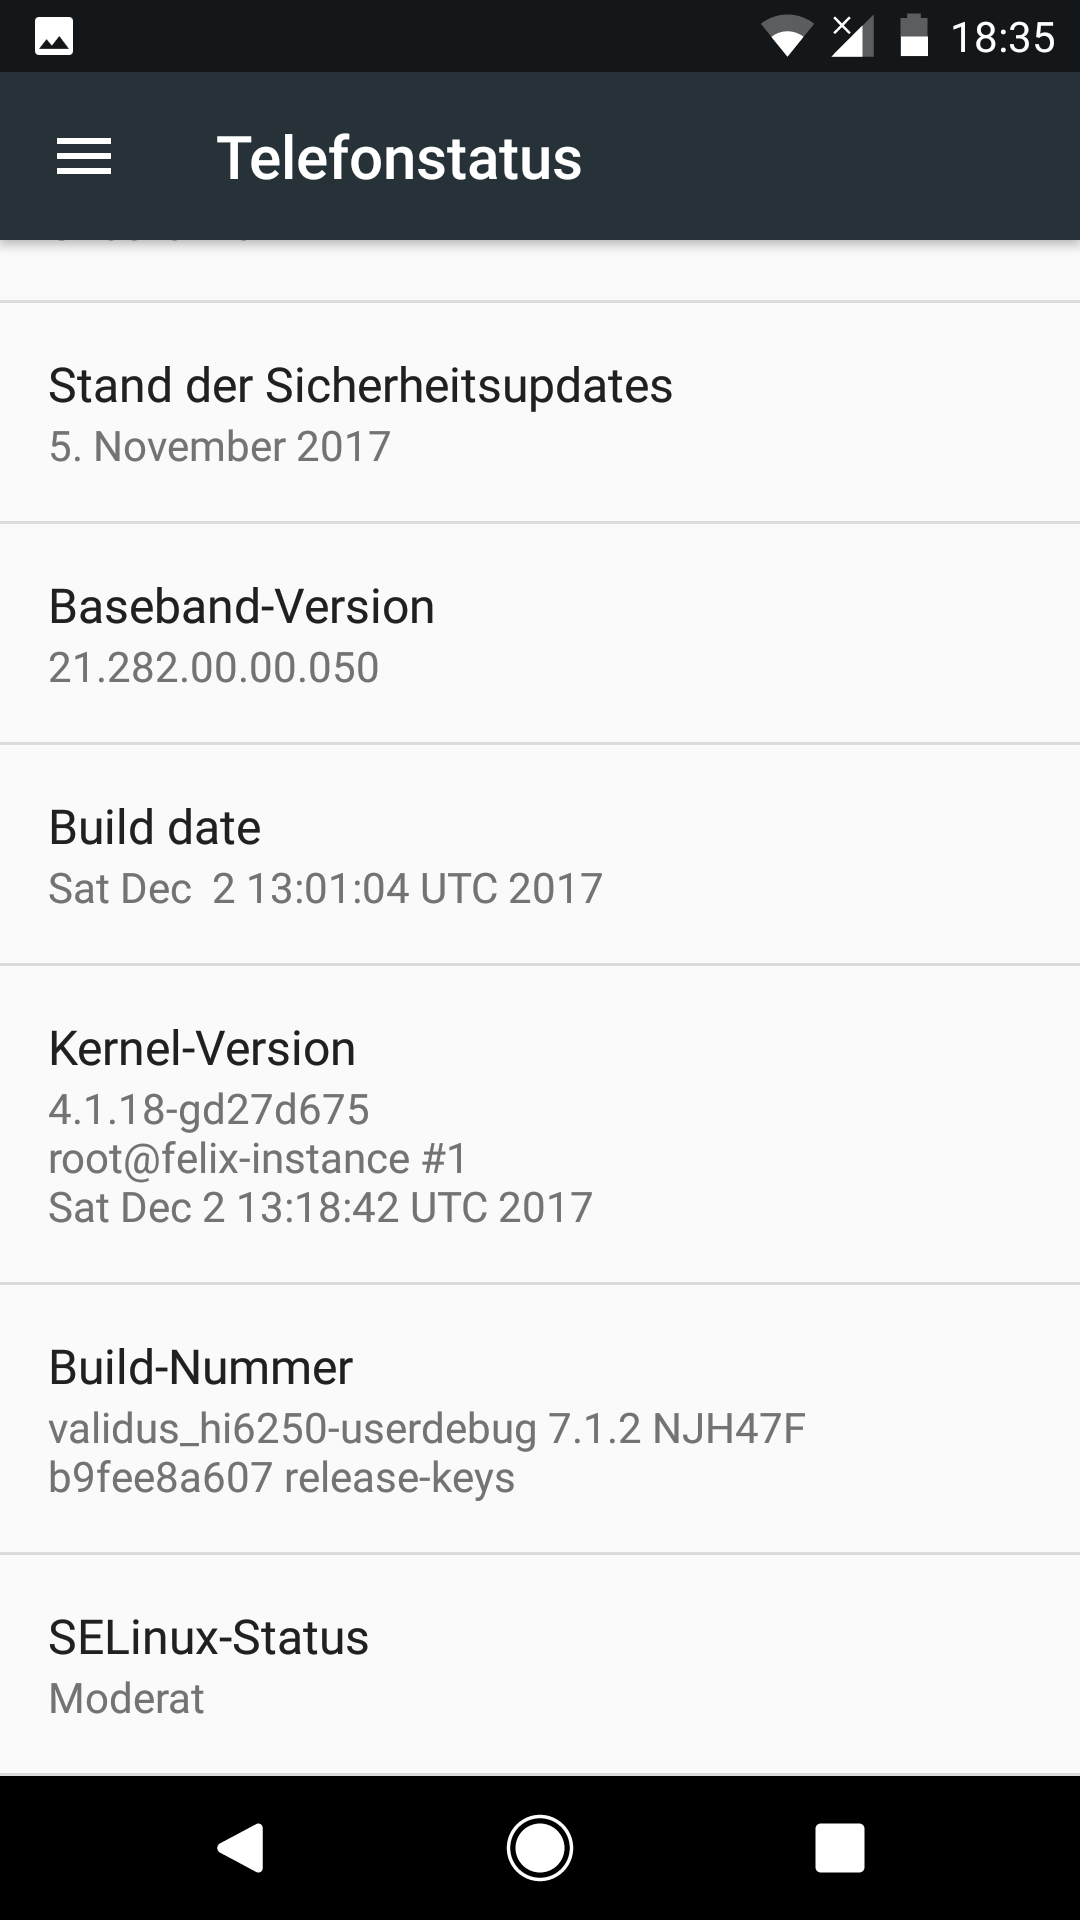 Validus 15.1 Android 7.1.2 Nougat ROM On Honor 5c 1 - Install Validus 15.1 Android 7.1.2 Nougat ROM On Honor 5c